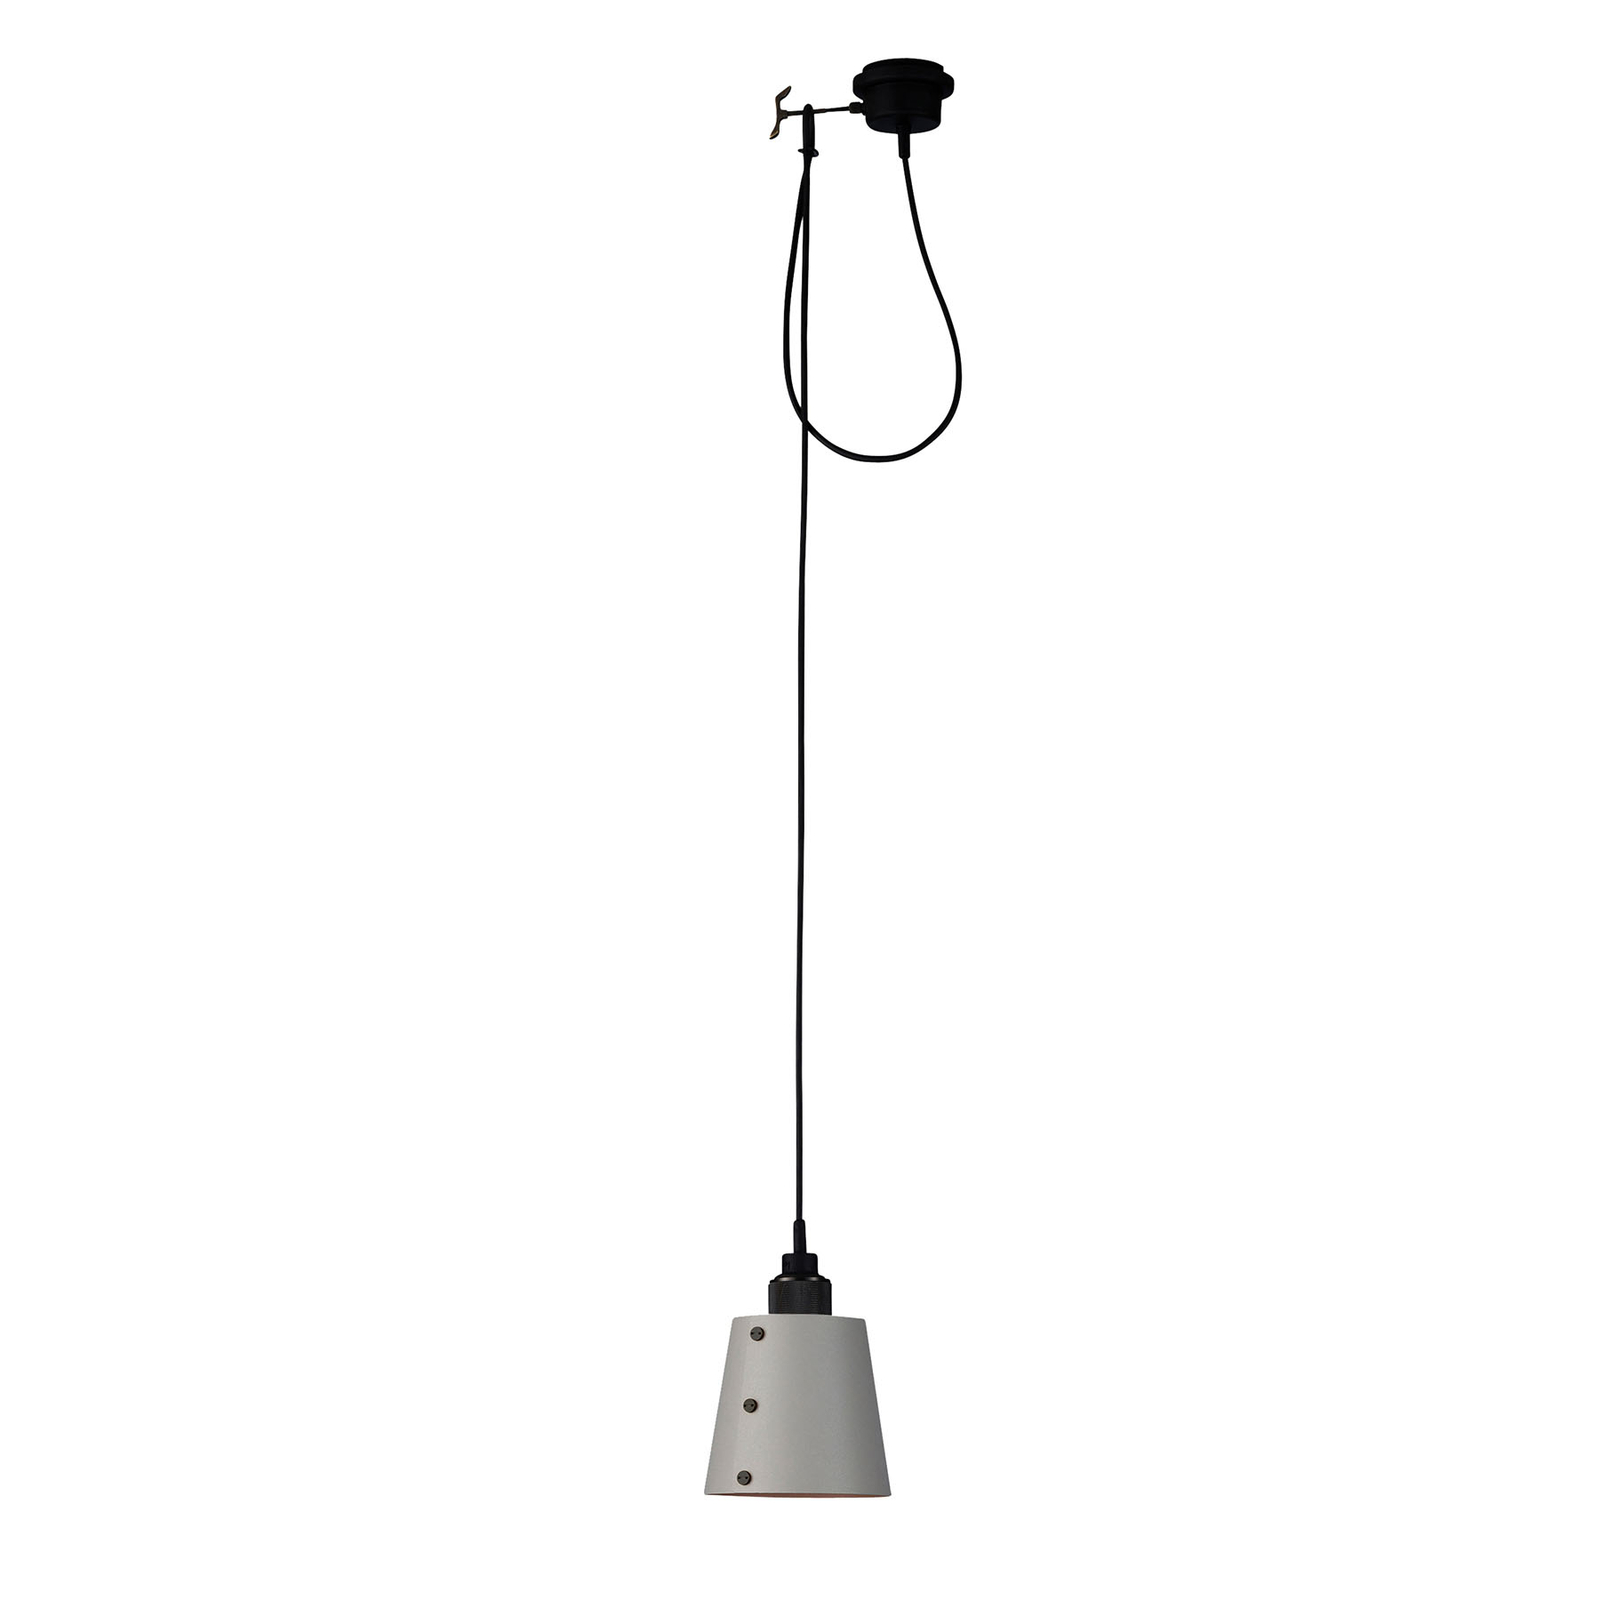 Buster + Punch Hooked 1.0 small gris/bronce